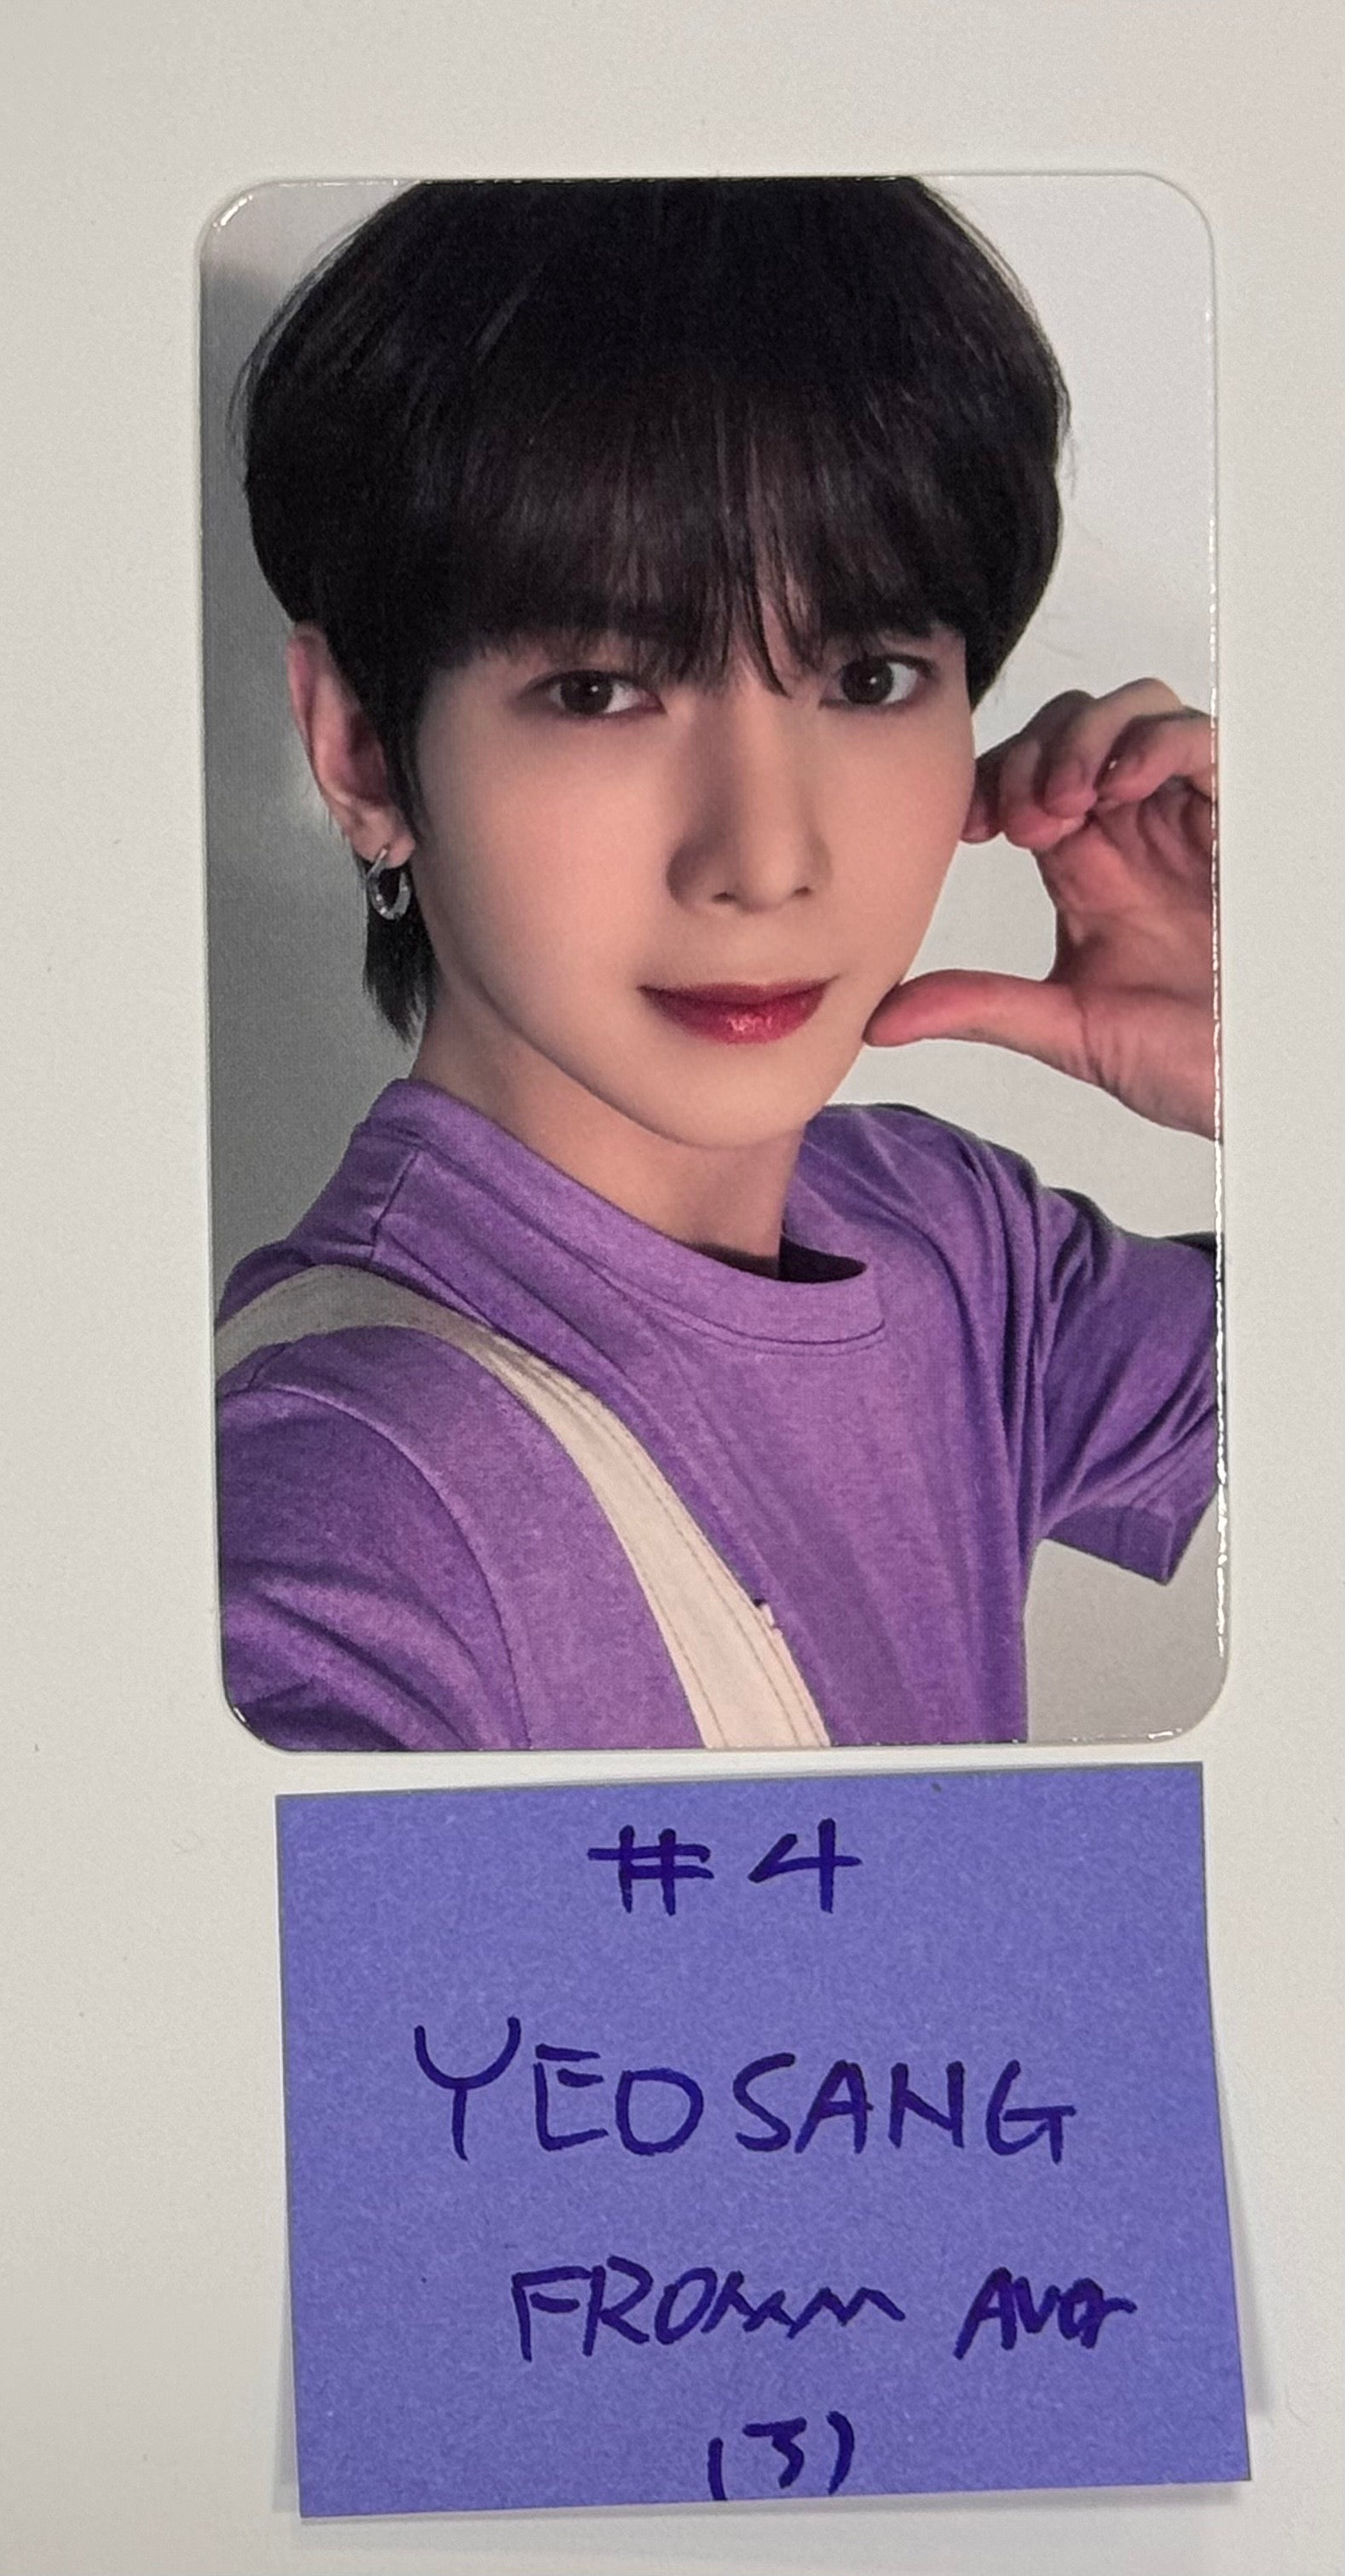 Ateez x Pott - Fromm Store MD Event Photocard [A Ver.] [24.5.8 